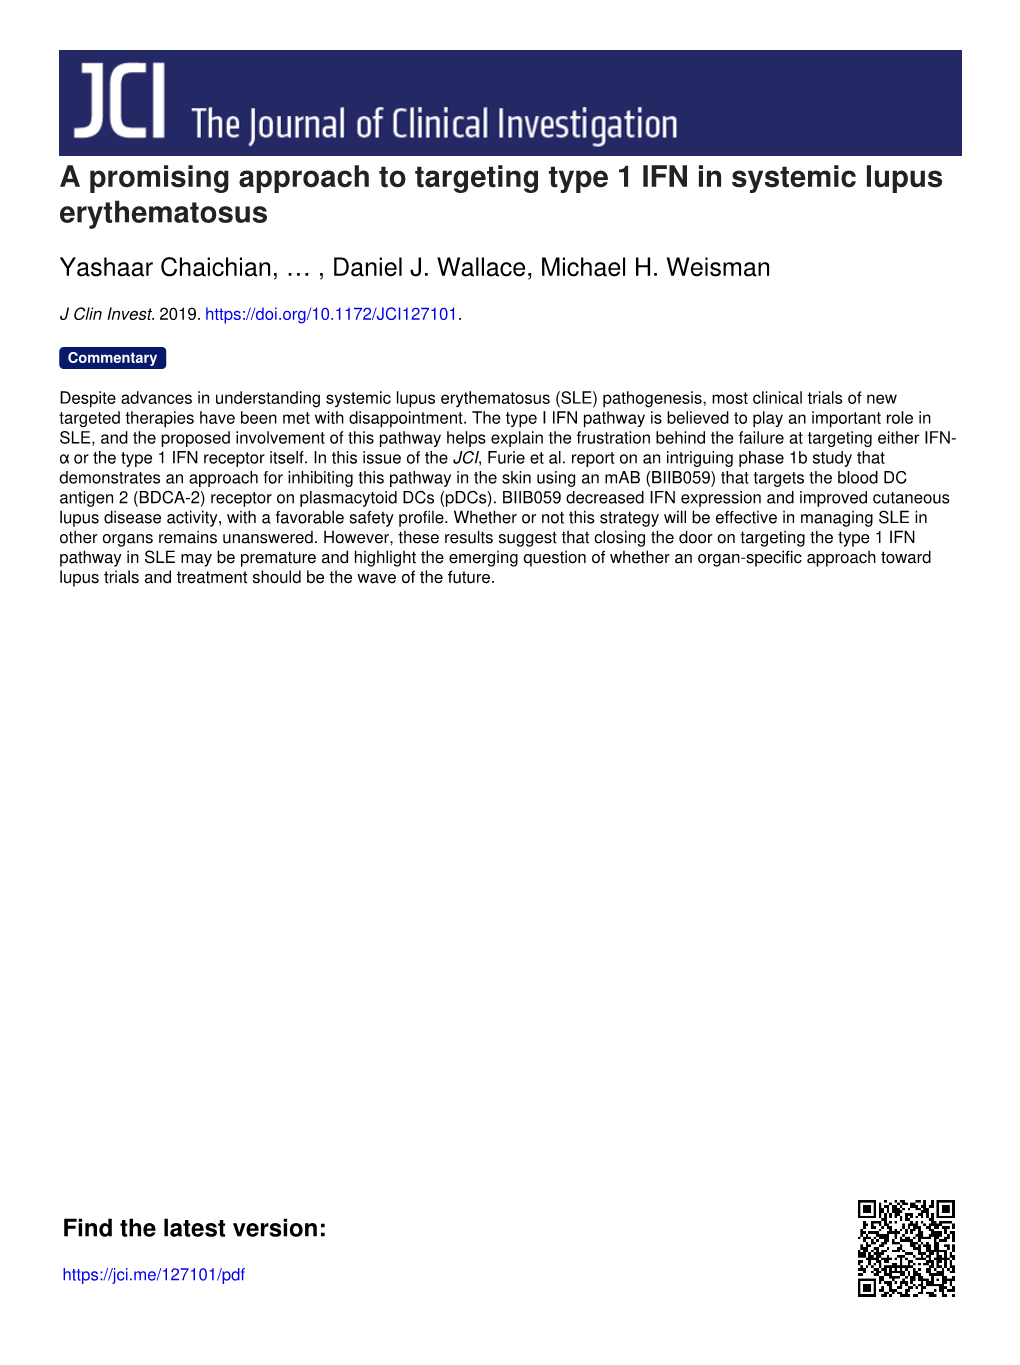 A Promising Approach to Targeting Type 1 IFN in Systemic Lupus Erythematosus